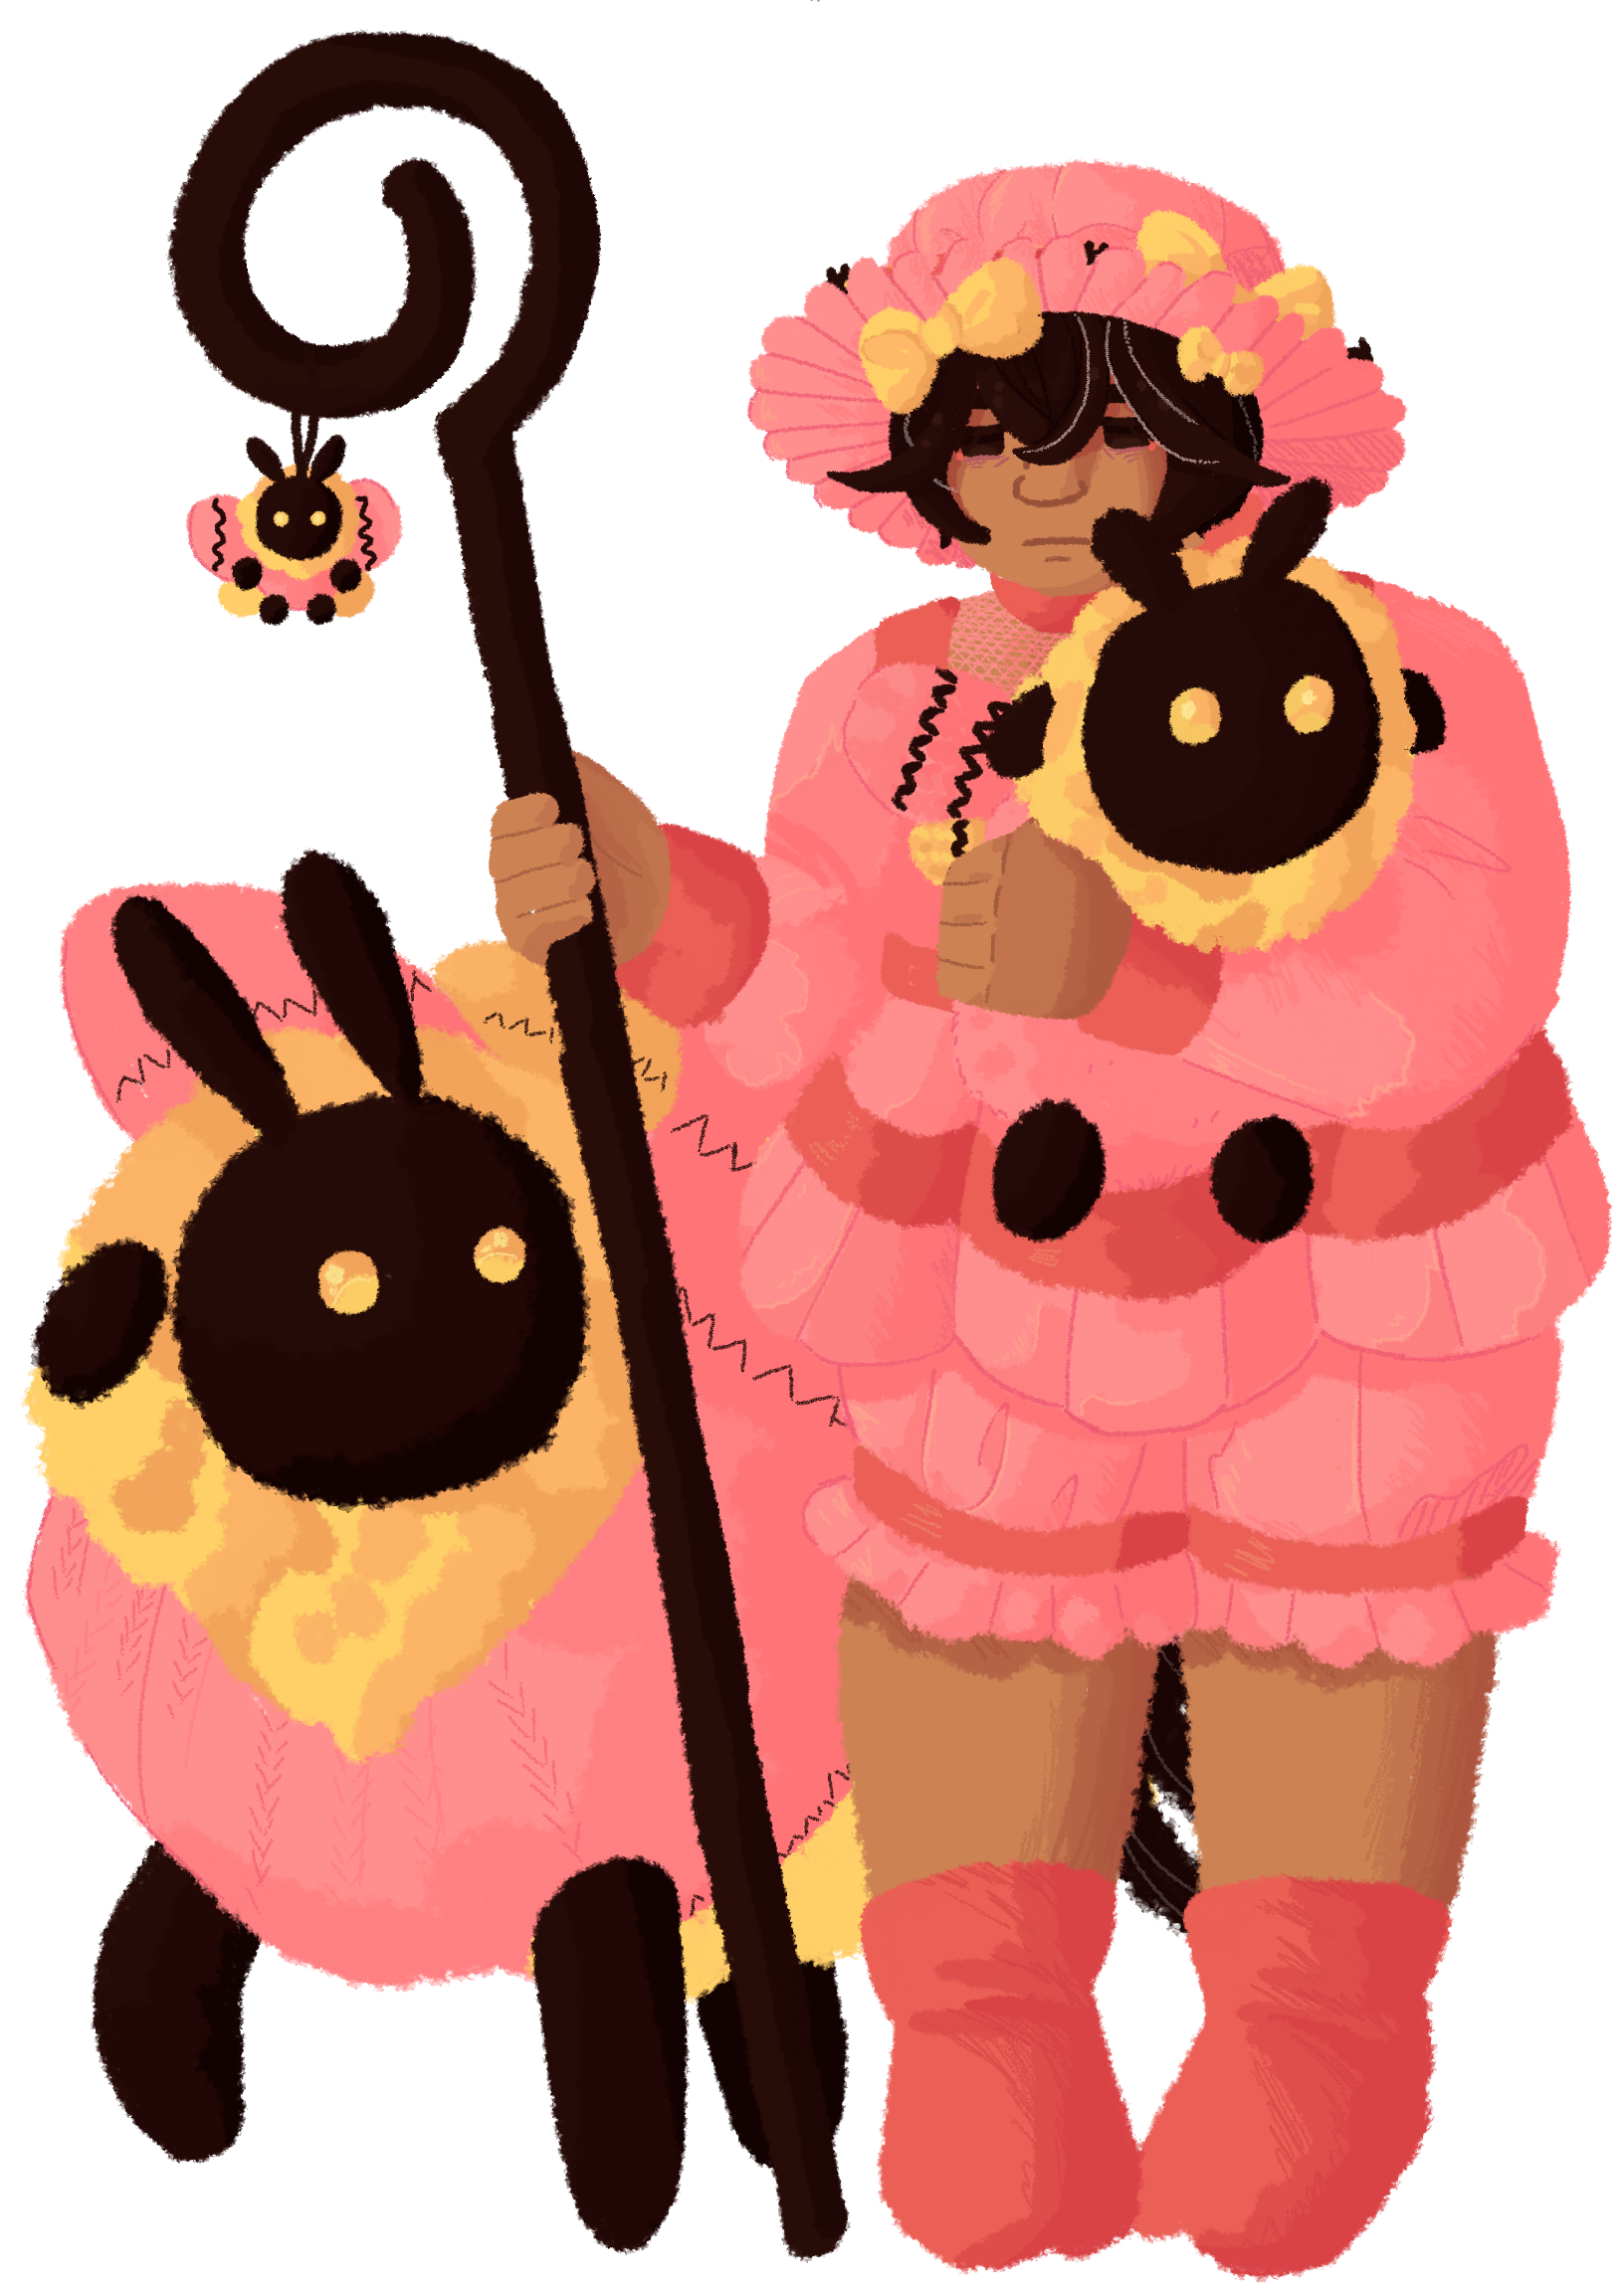 Erina is a girl with brown skin and dark brown hair, some of her hair is greying. She wears pink lolita pajamas and carries a wooden staff and a sheepmoth plushie. Next to her is a sheepmoth, a sheep covered with pink knit and thick antennae